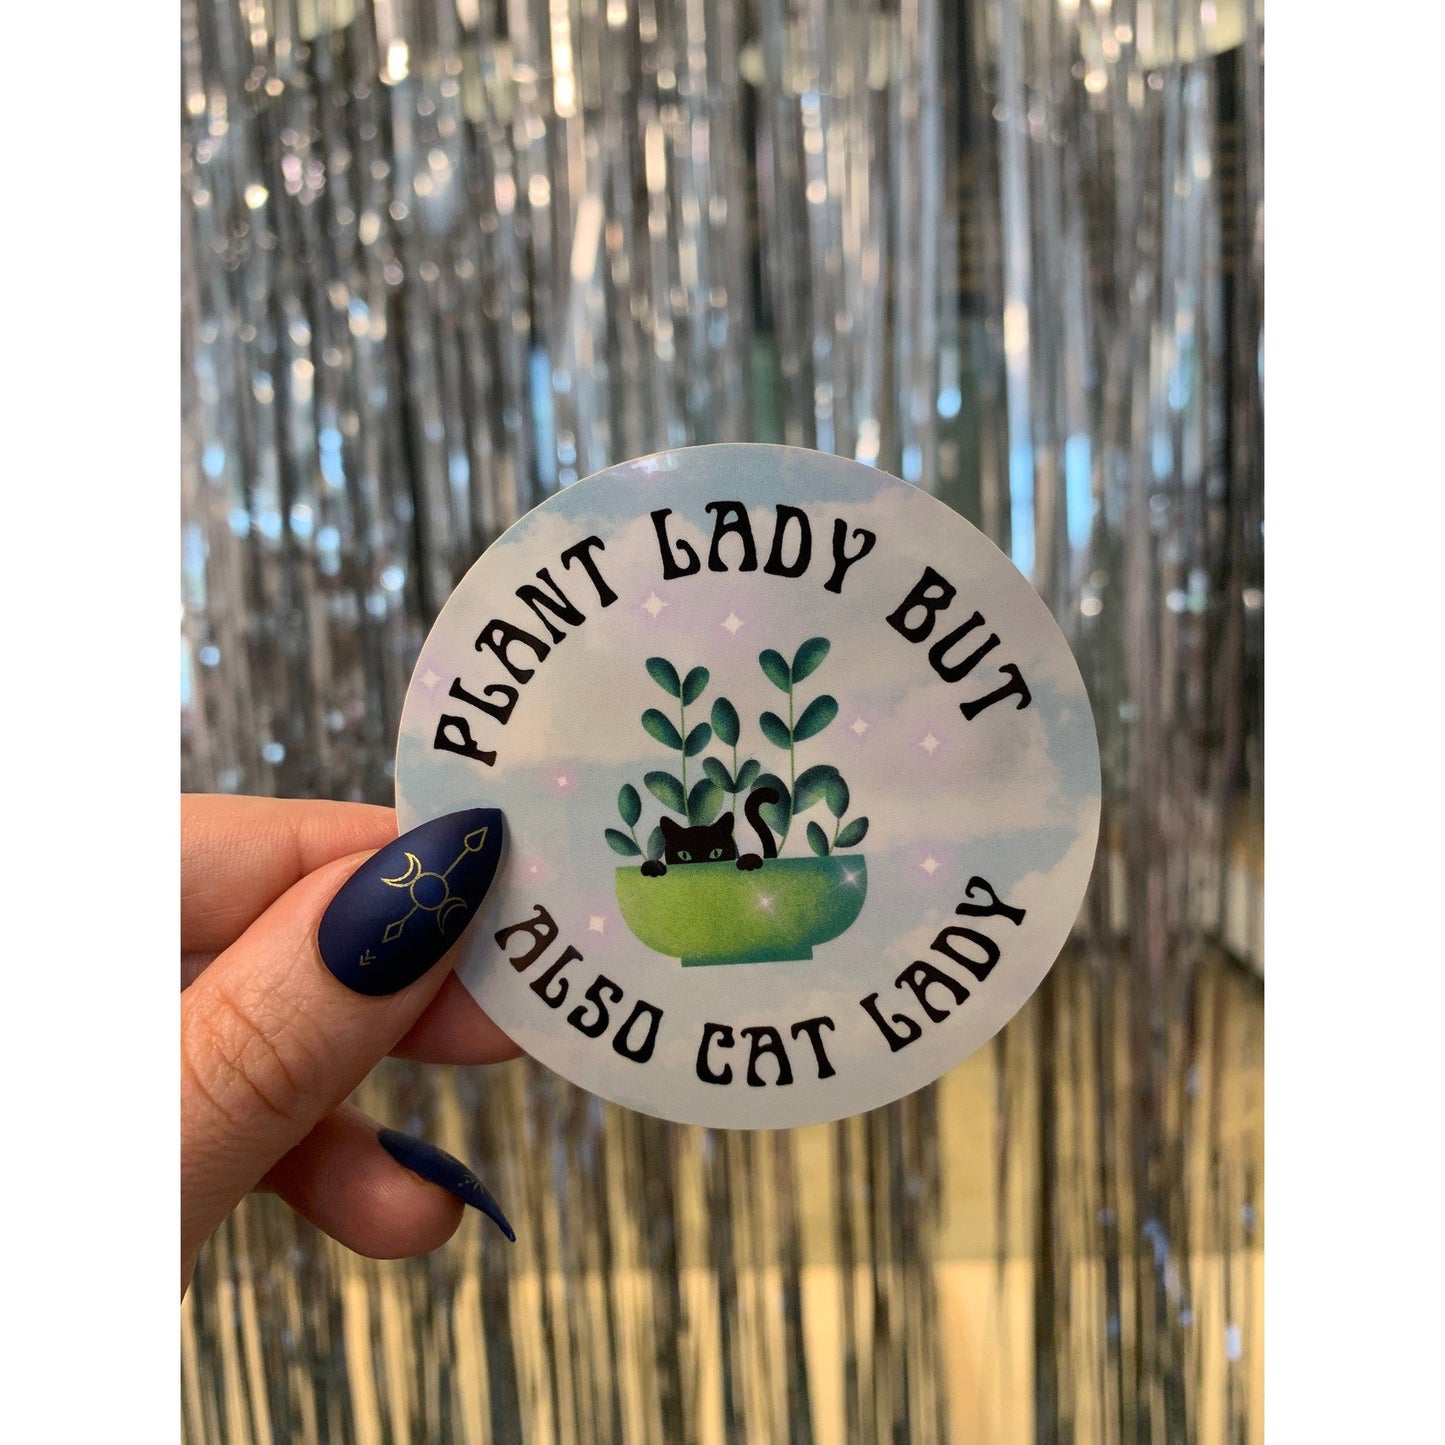 Plant Lady But Also Cat Lady Glossy Circle Vinyl Sticker 3in x 3in